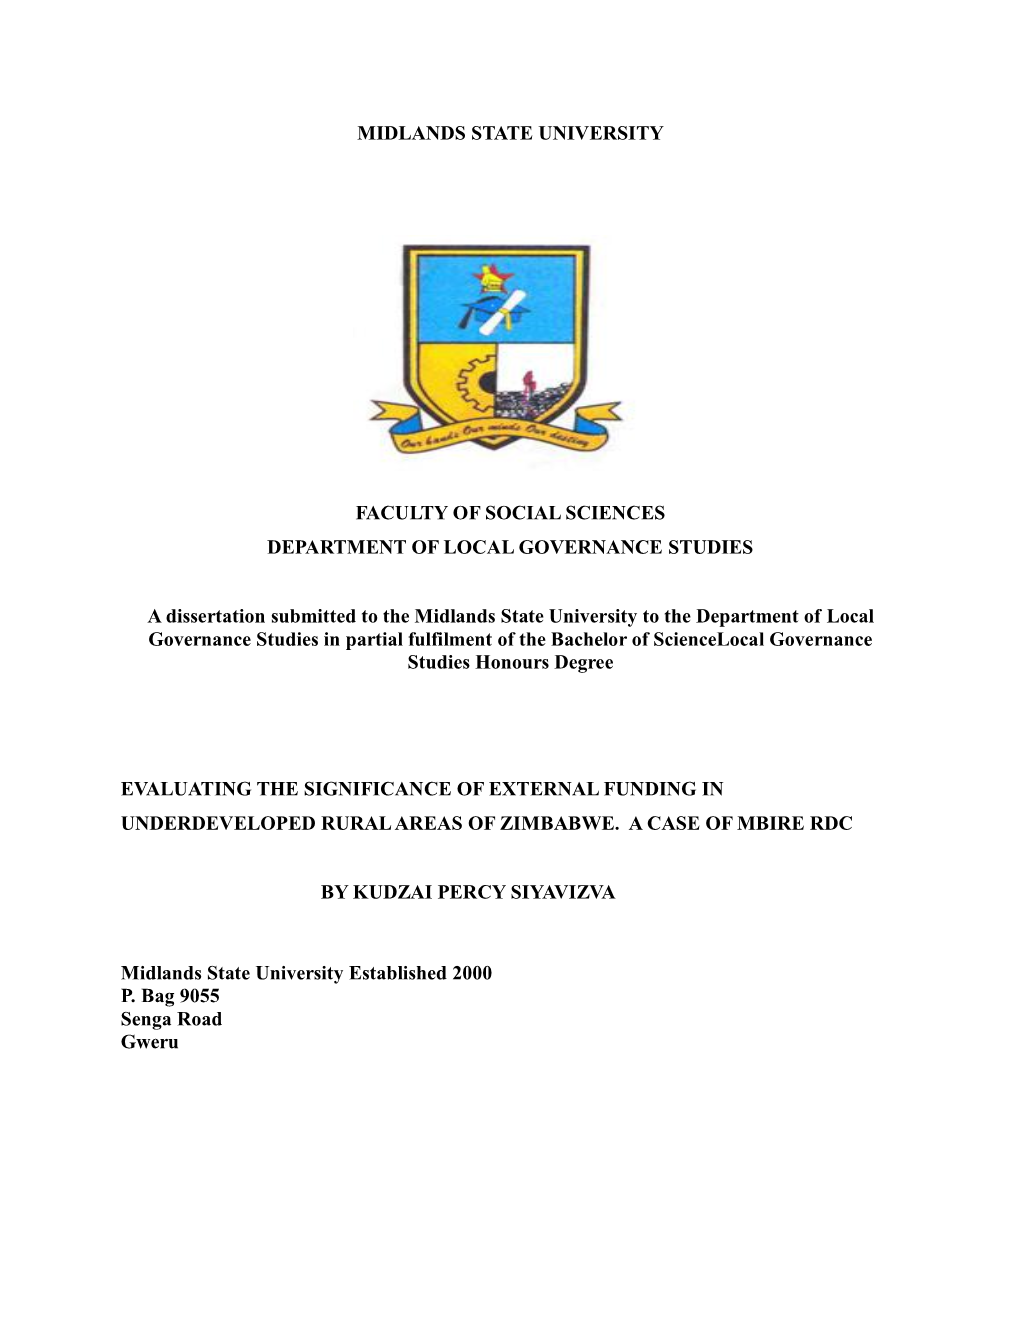 MIDLANDS STATE UNIVERSITY FACULTY of SOCIAL SCIENCES DEPARTMENT of LOCAL GOVERNANCE STUDIES a Dissertation Submitted to the Midl